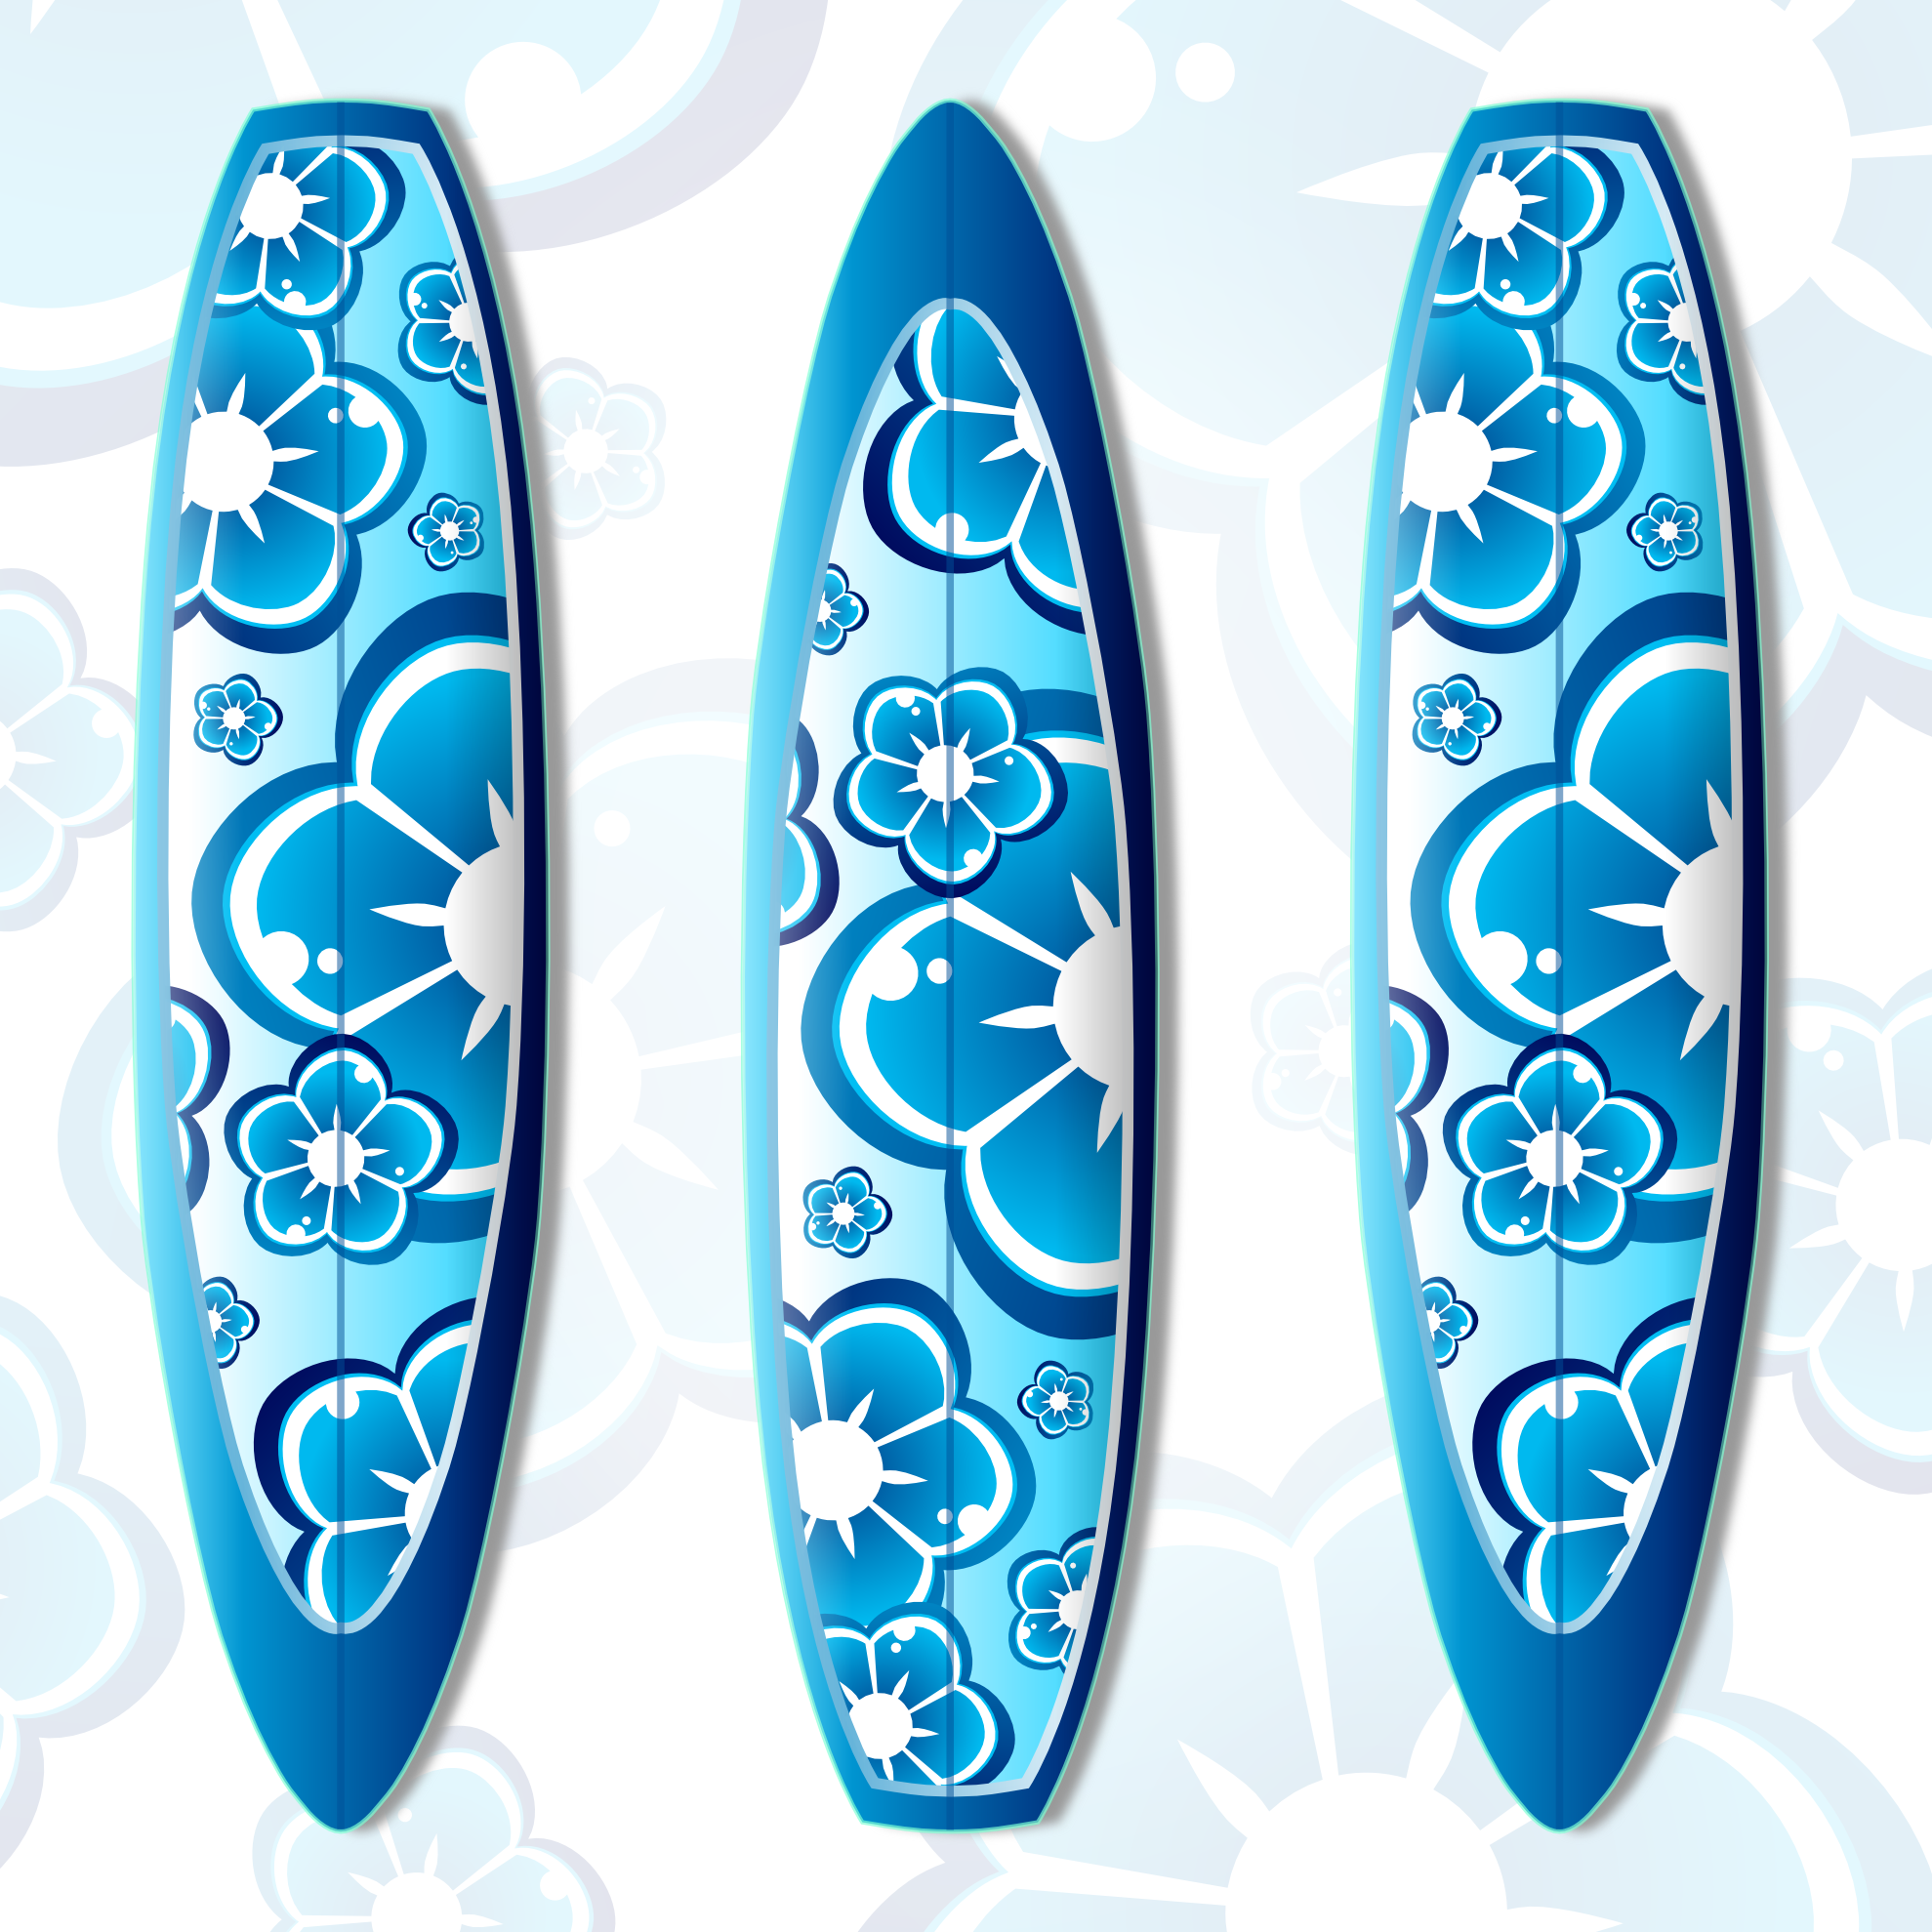 Free Surf Board Images, Download Free Clip Art, Free Clip